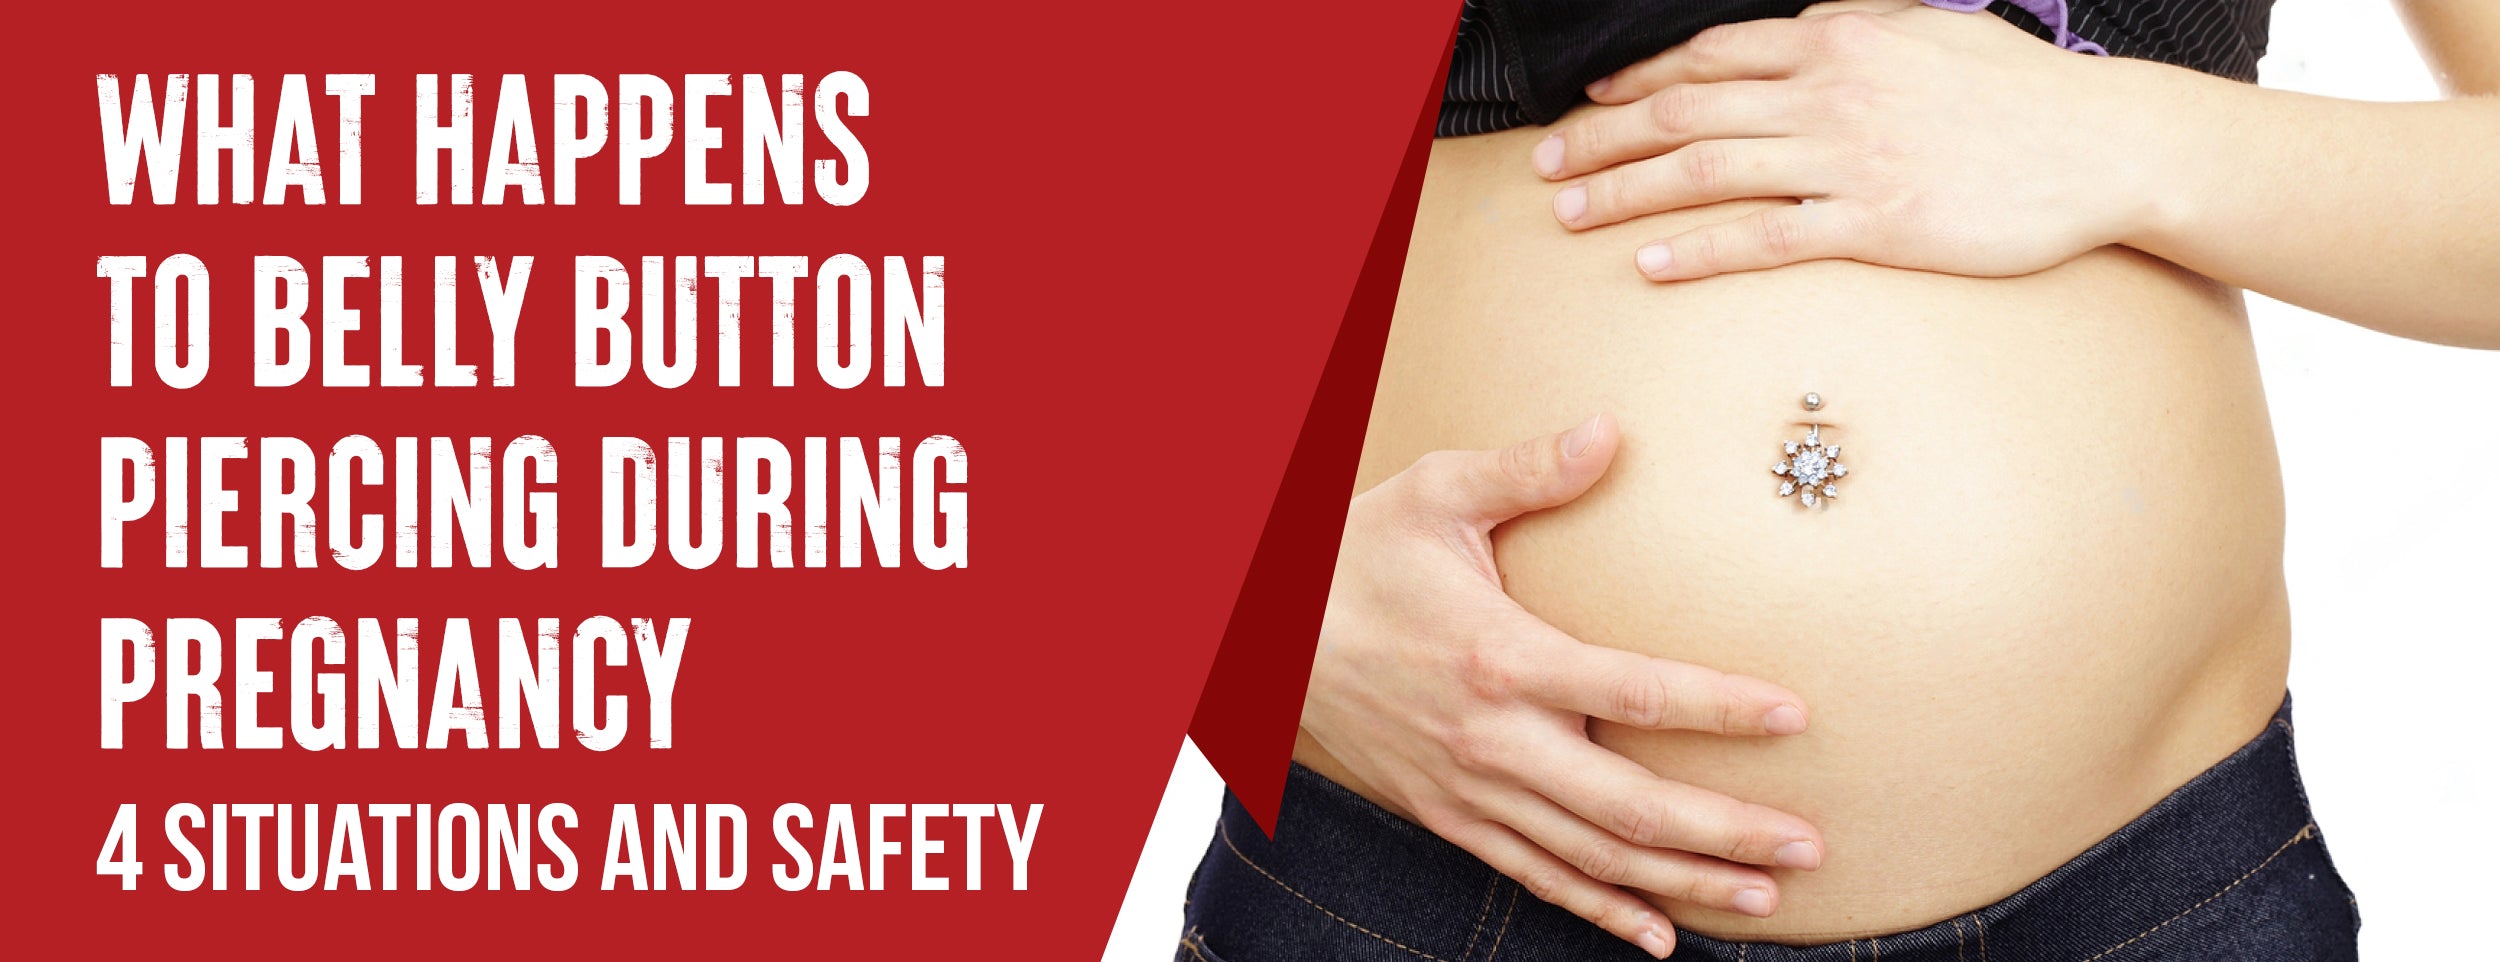 Pregnancy and Belly Button Piercing: 4 Impacts and 3 Safe Practices